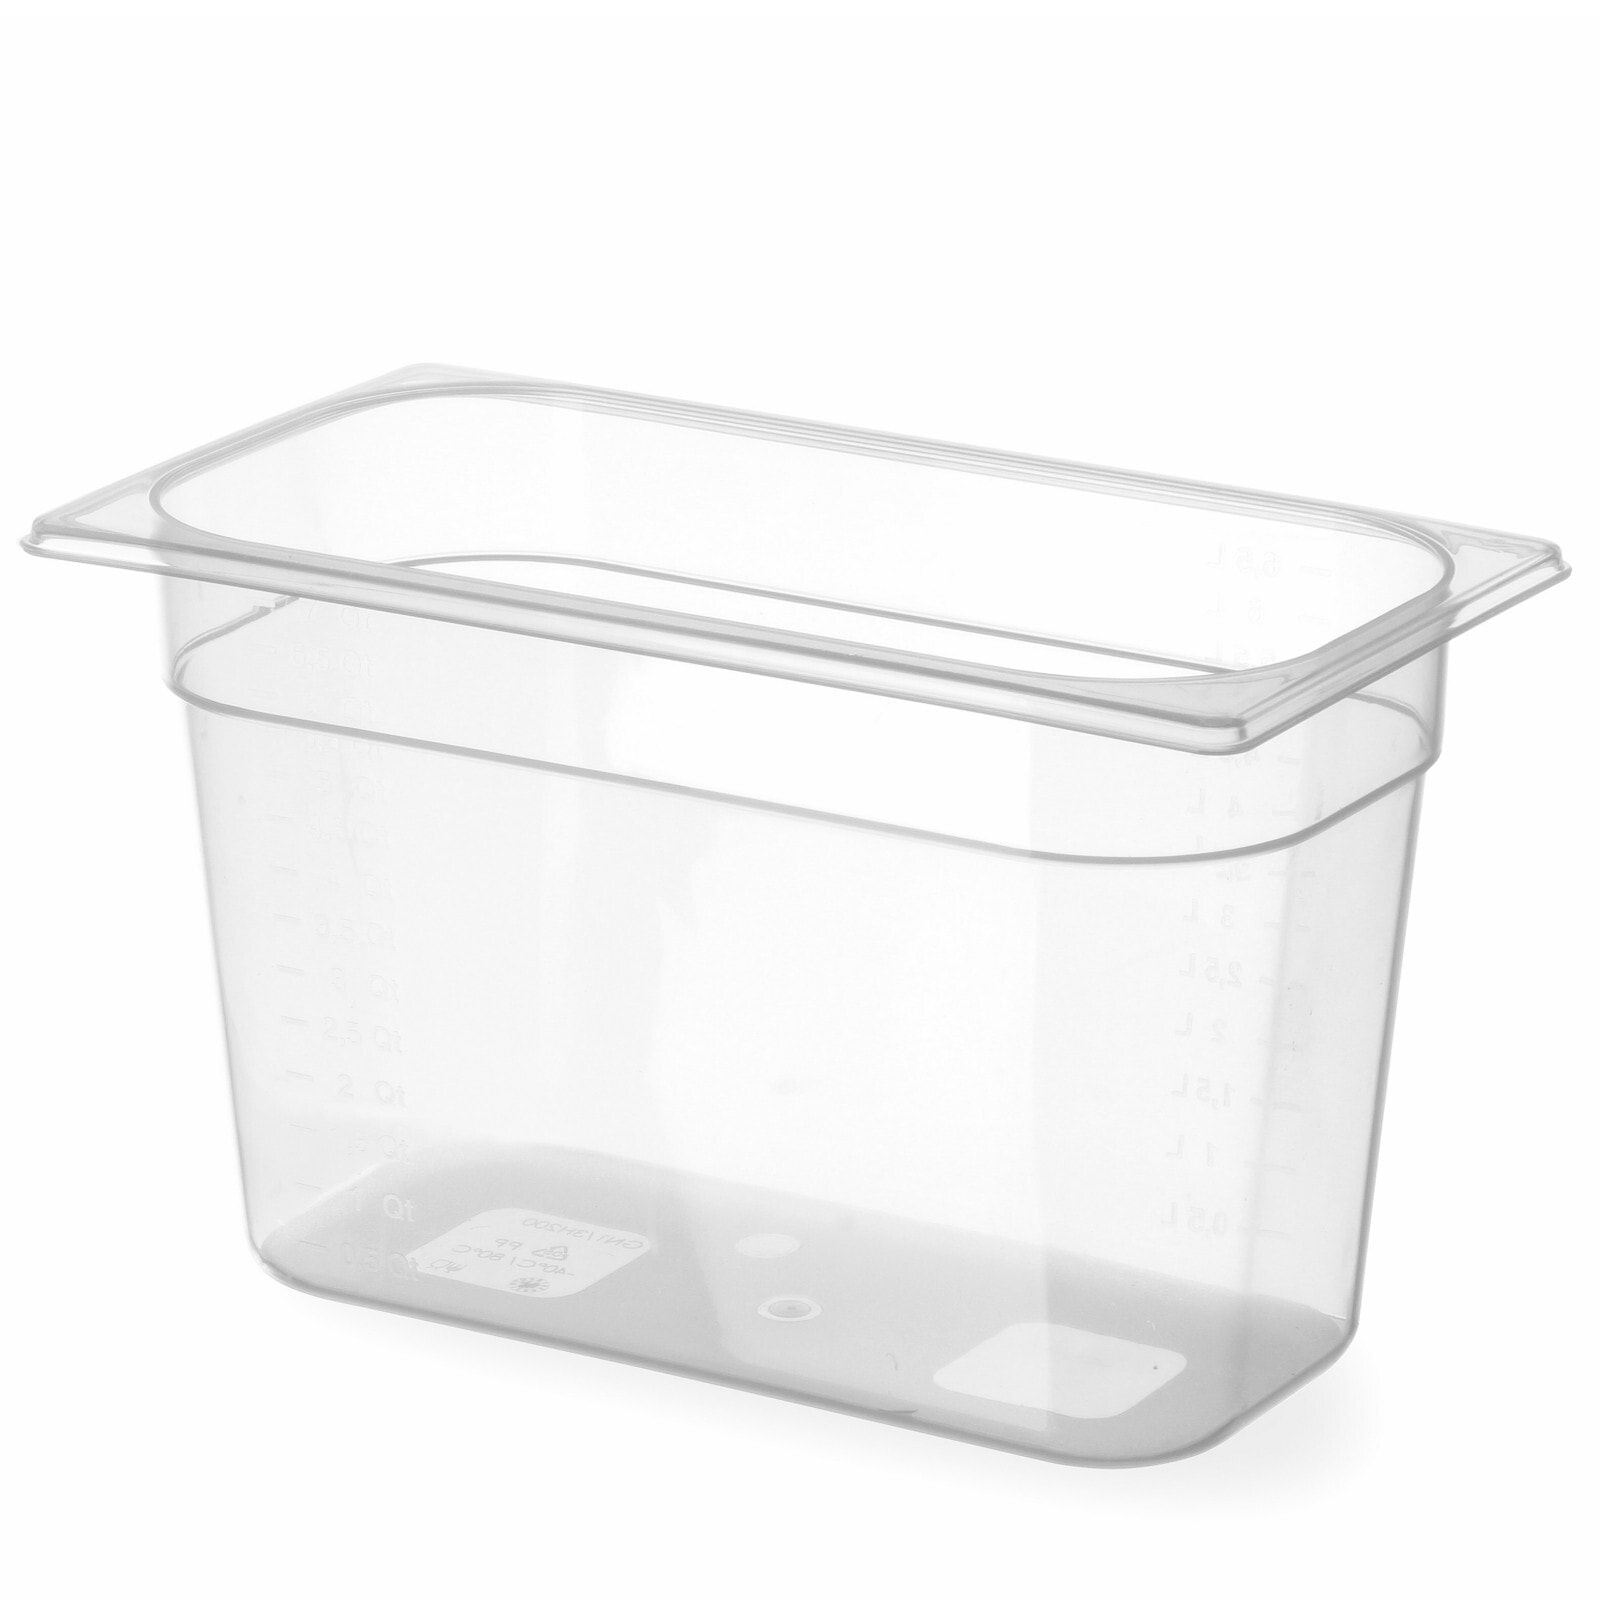 Gastronomy container made of polypropylene GN 1/3, height 100 mm - Hendi 880227